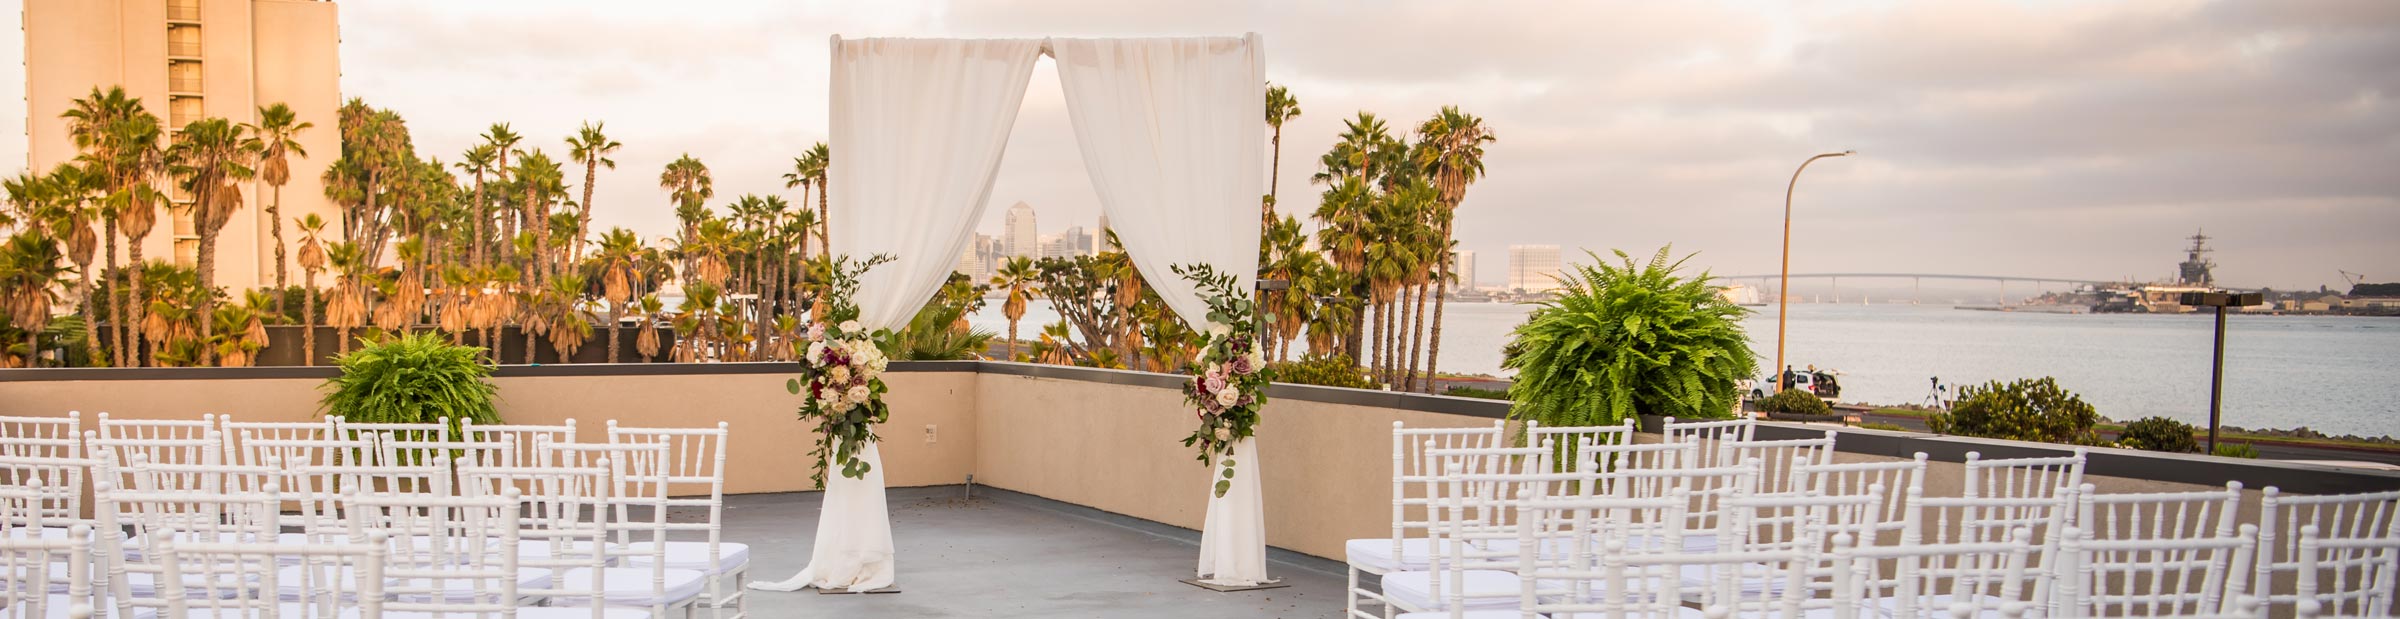 San Diego Wedding Packages Harbor View Loft